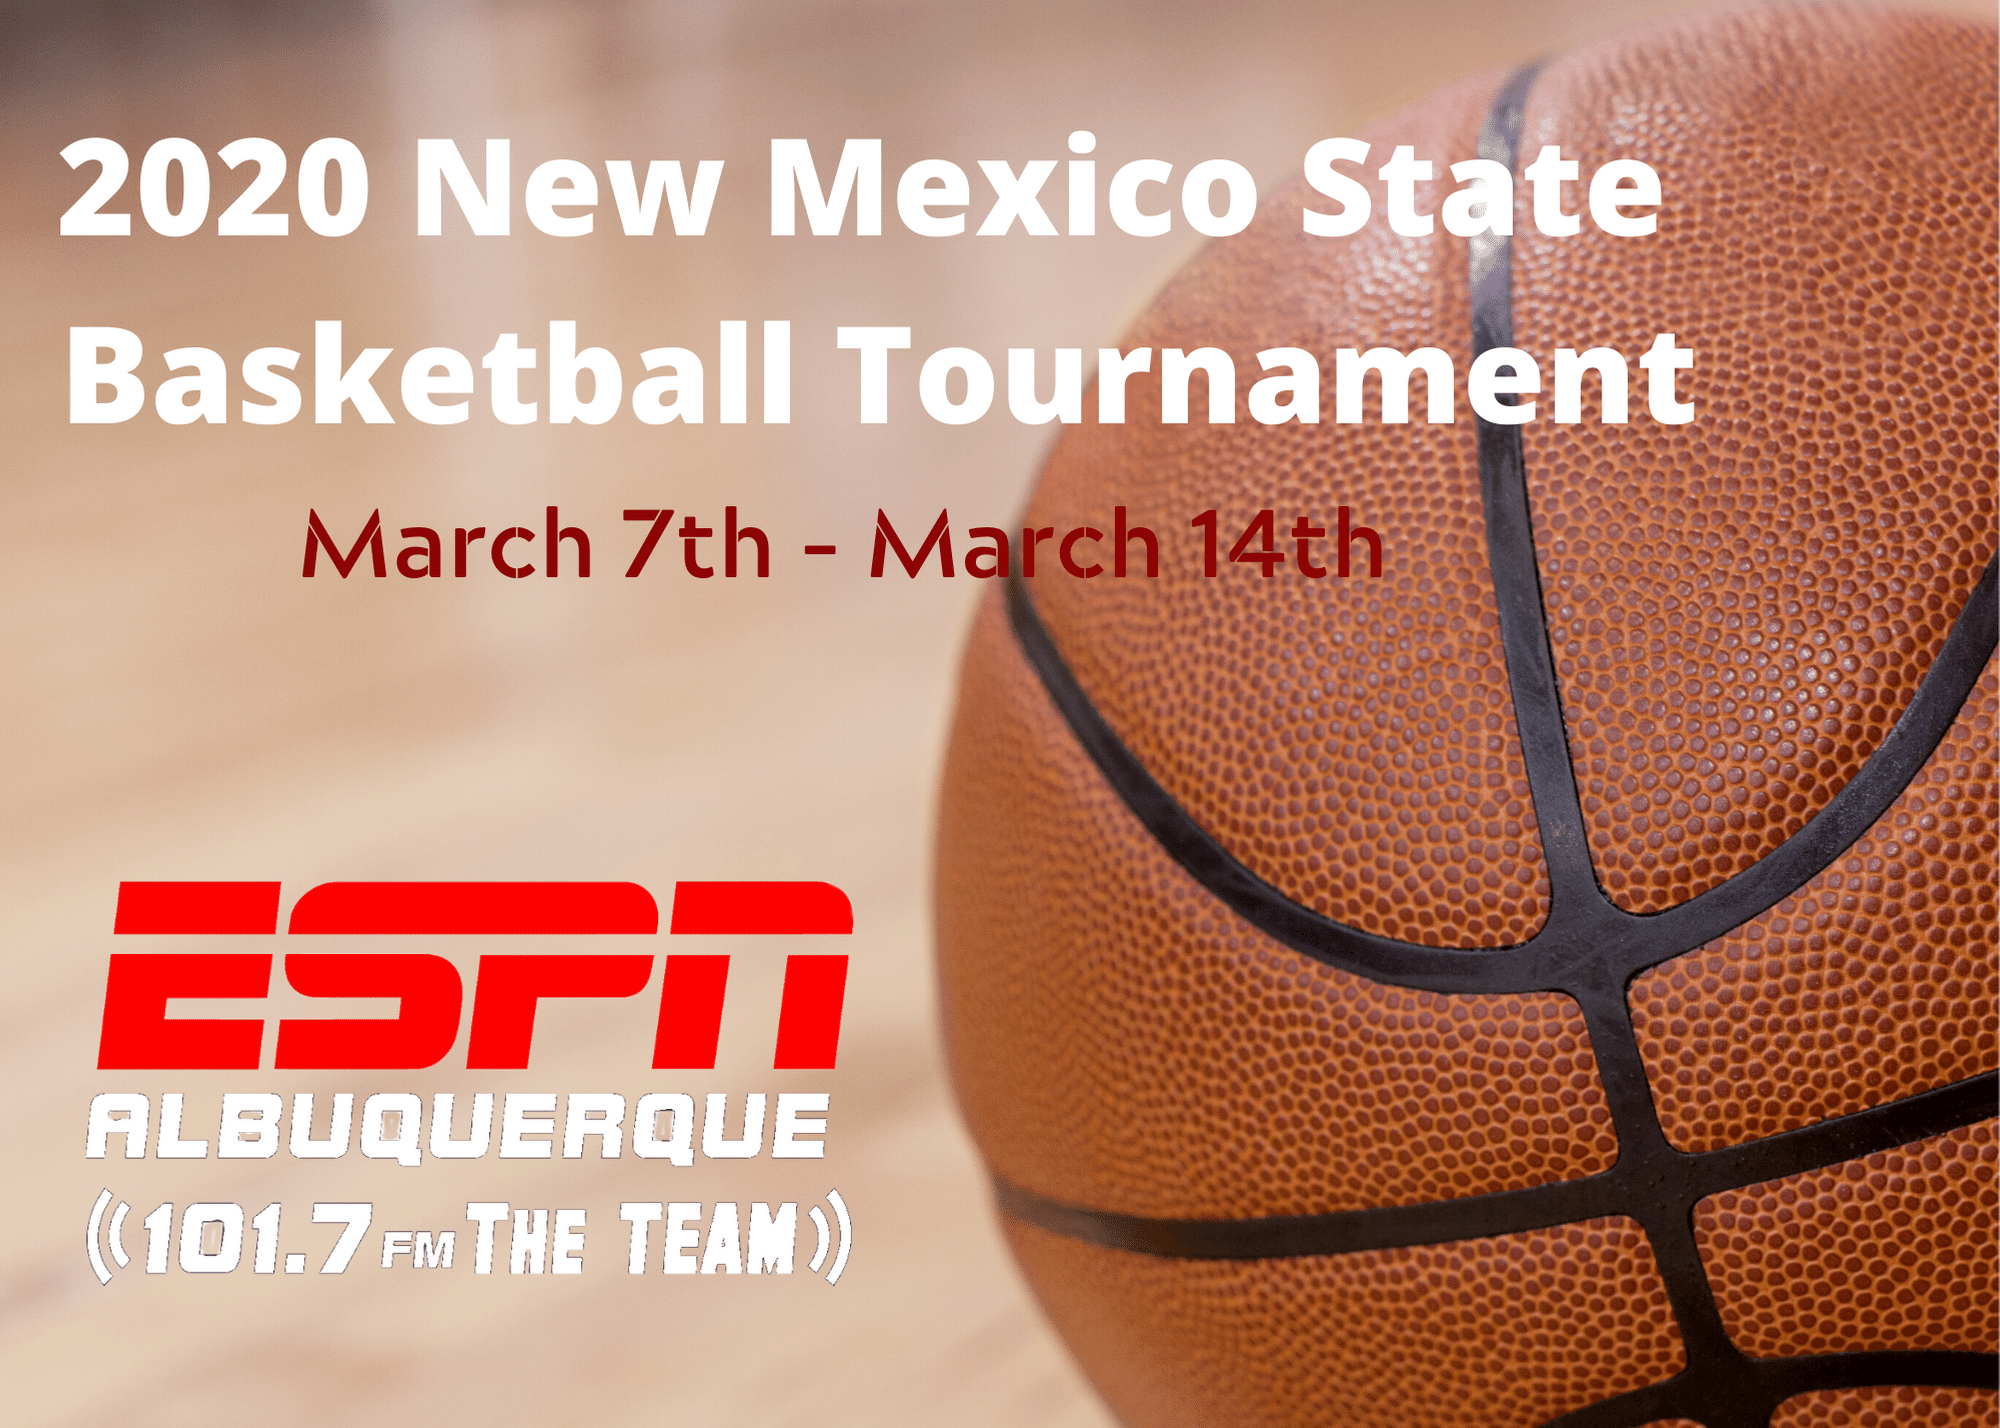 2020 New Mexico State Basketball Championships